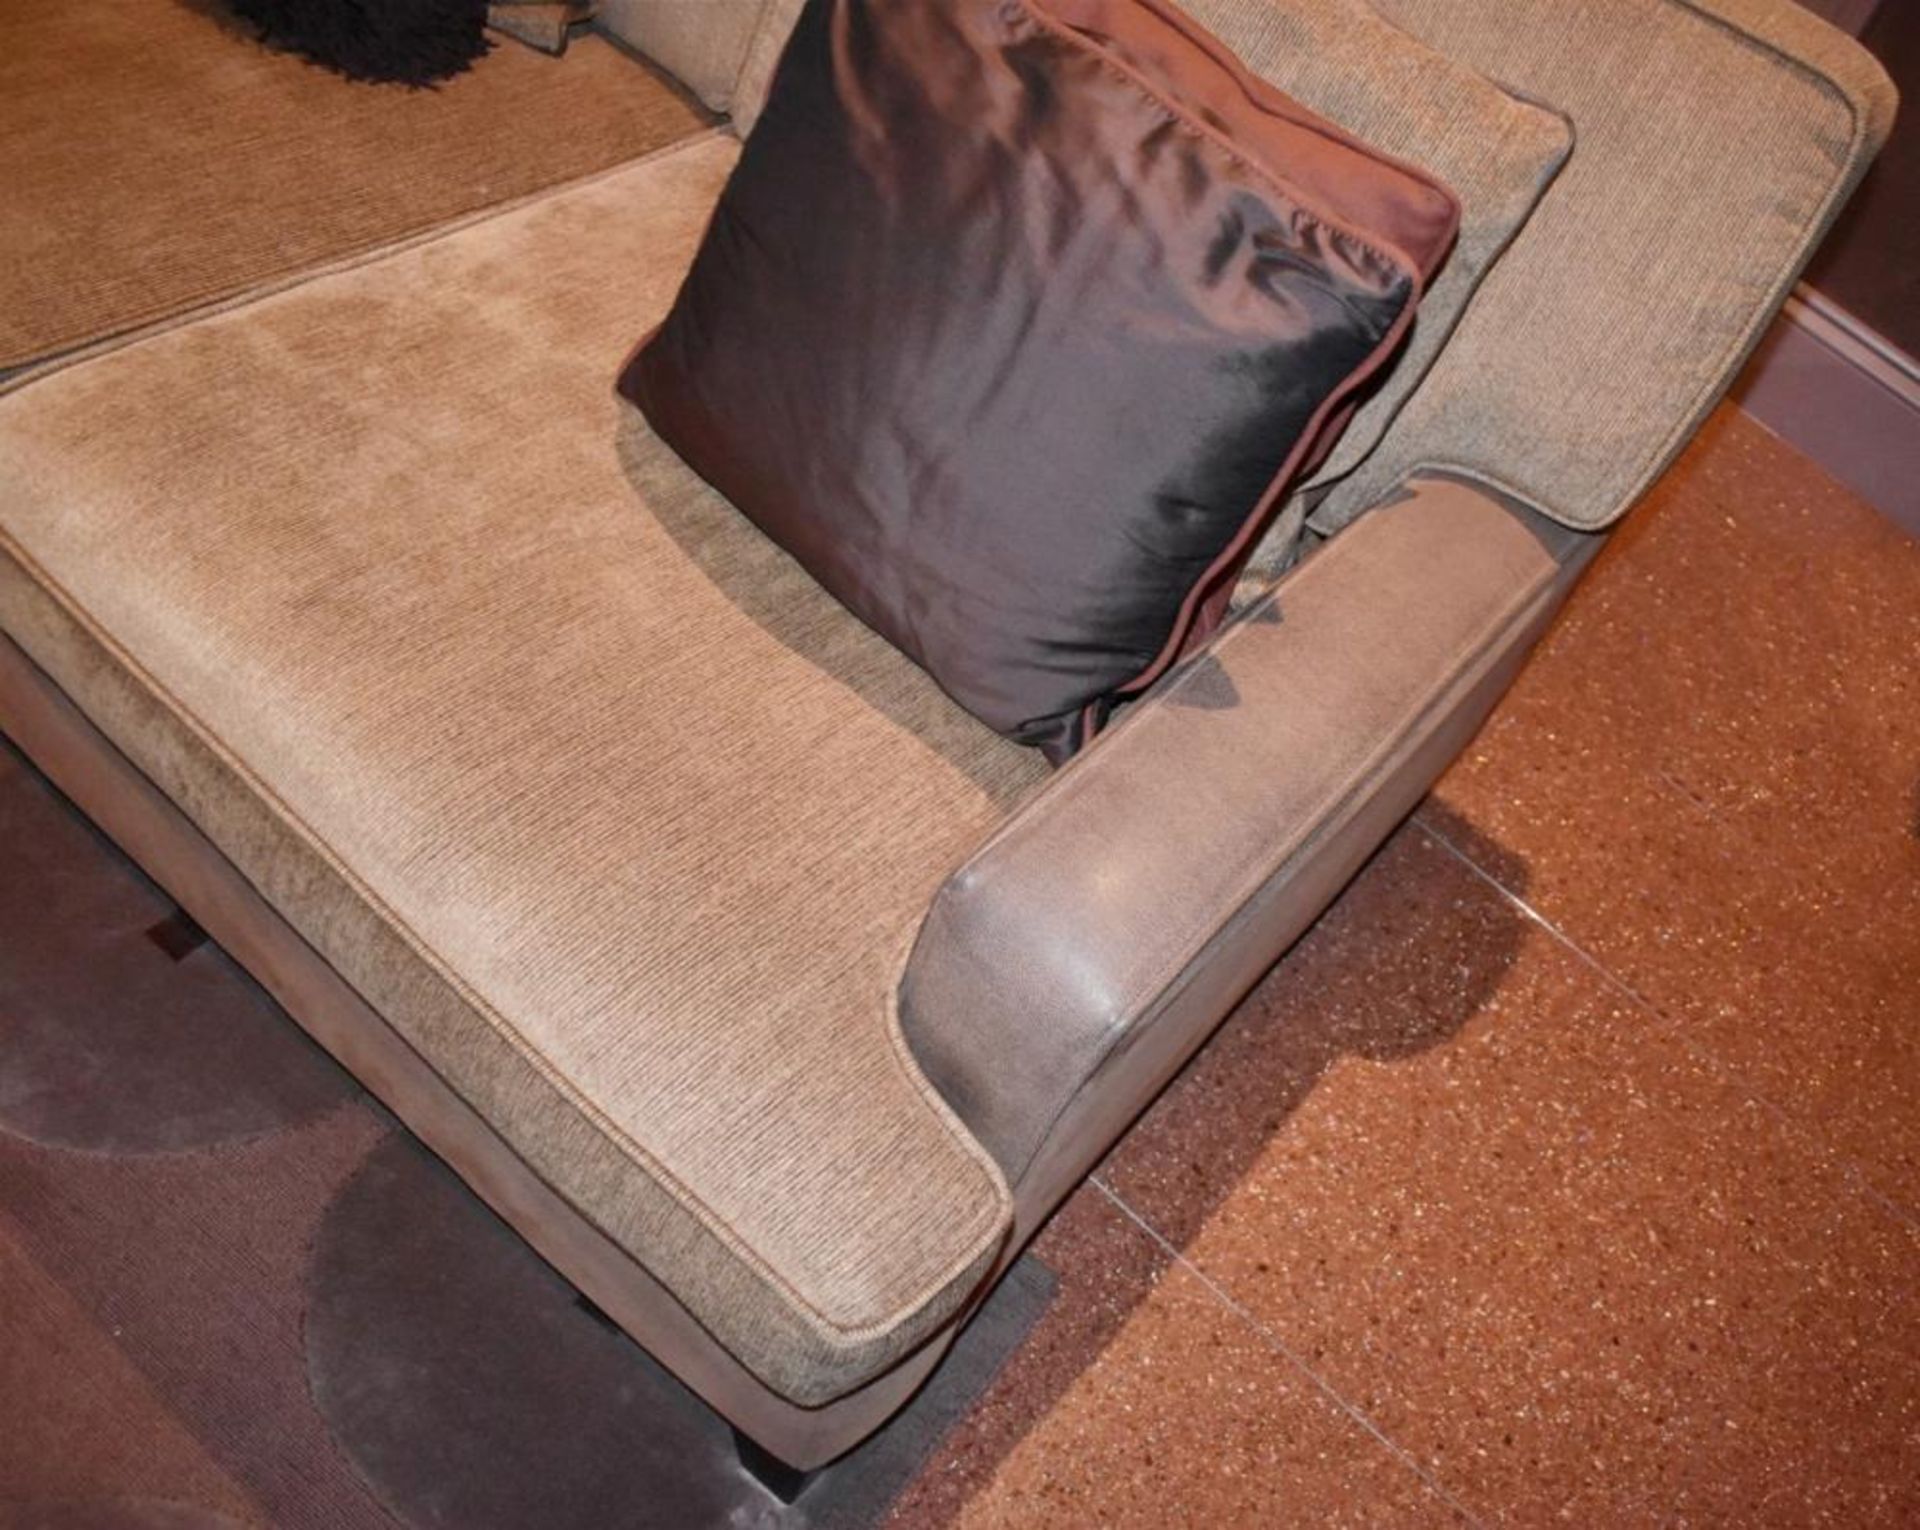 1 x Left-Hand Corner Sofa Upholstered In Light Mocha Leather And Chenille Fabrics - Includes Cushion - Image 10 of 11